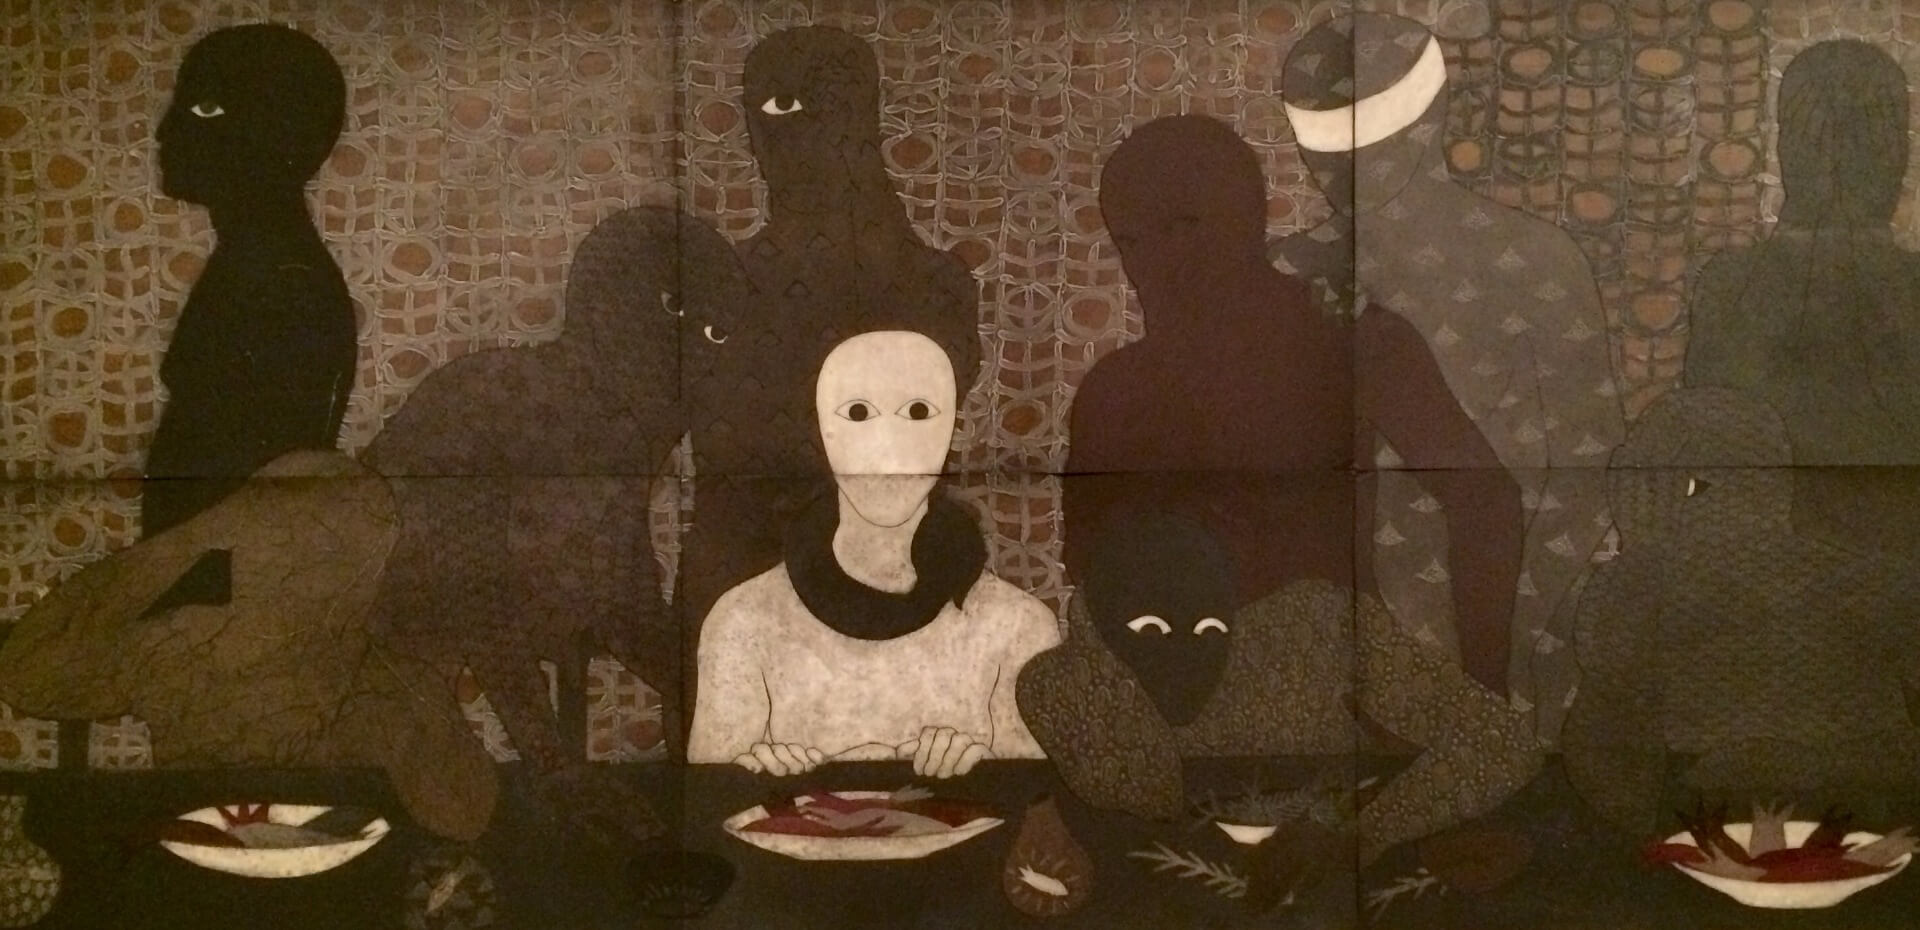 3_Belkis Ayon, The Supper, 1991